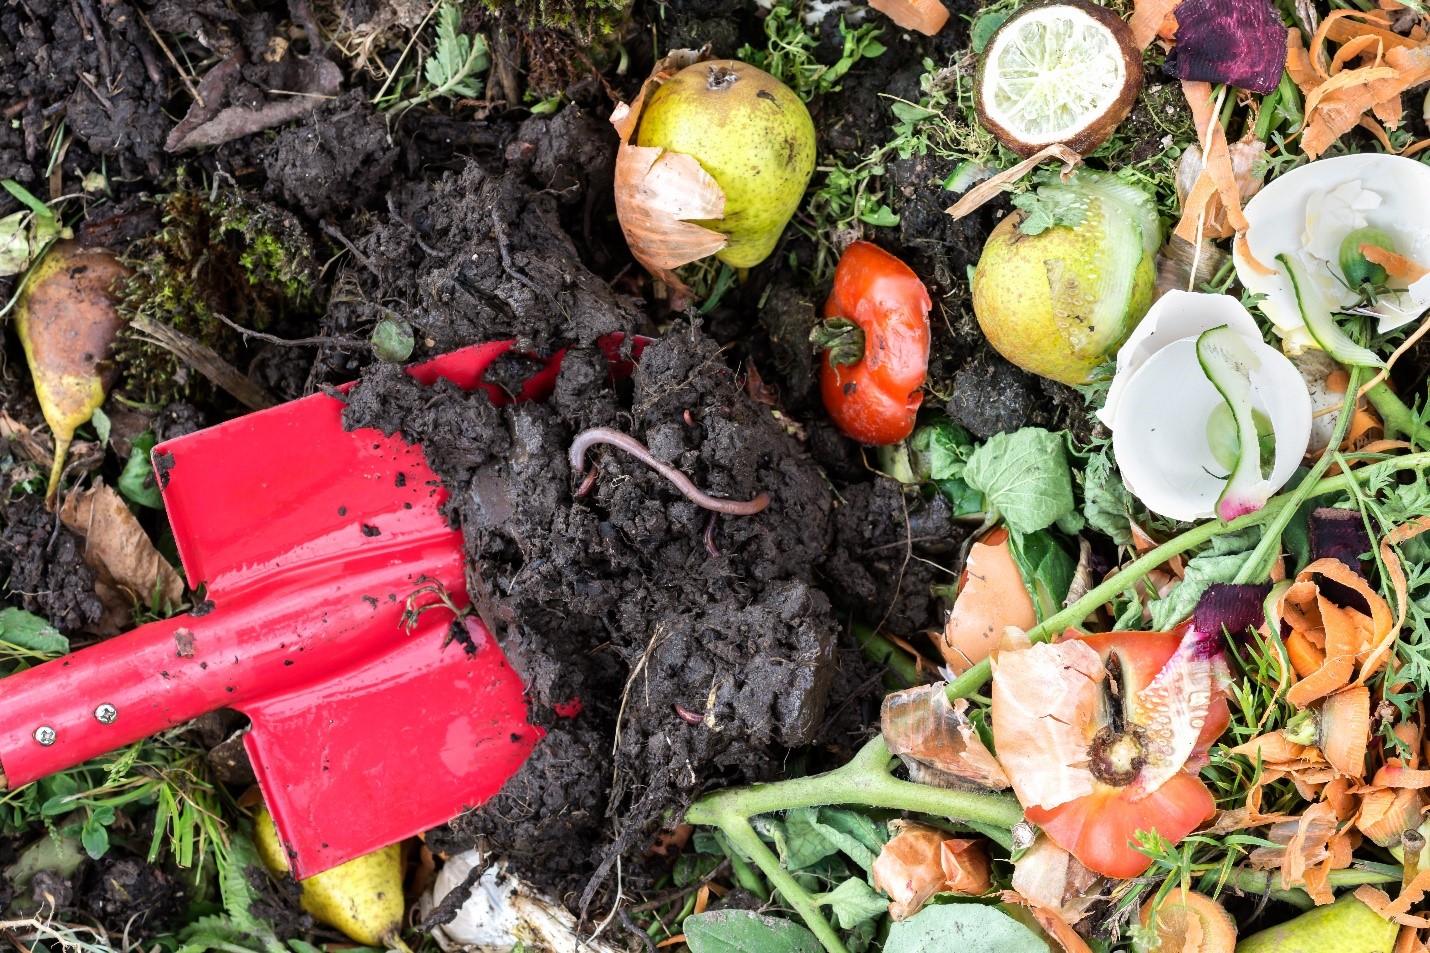 Food waste in soil with a worm and a red shovel